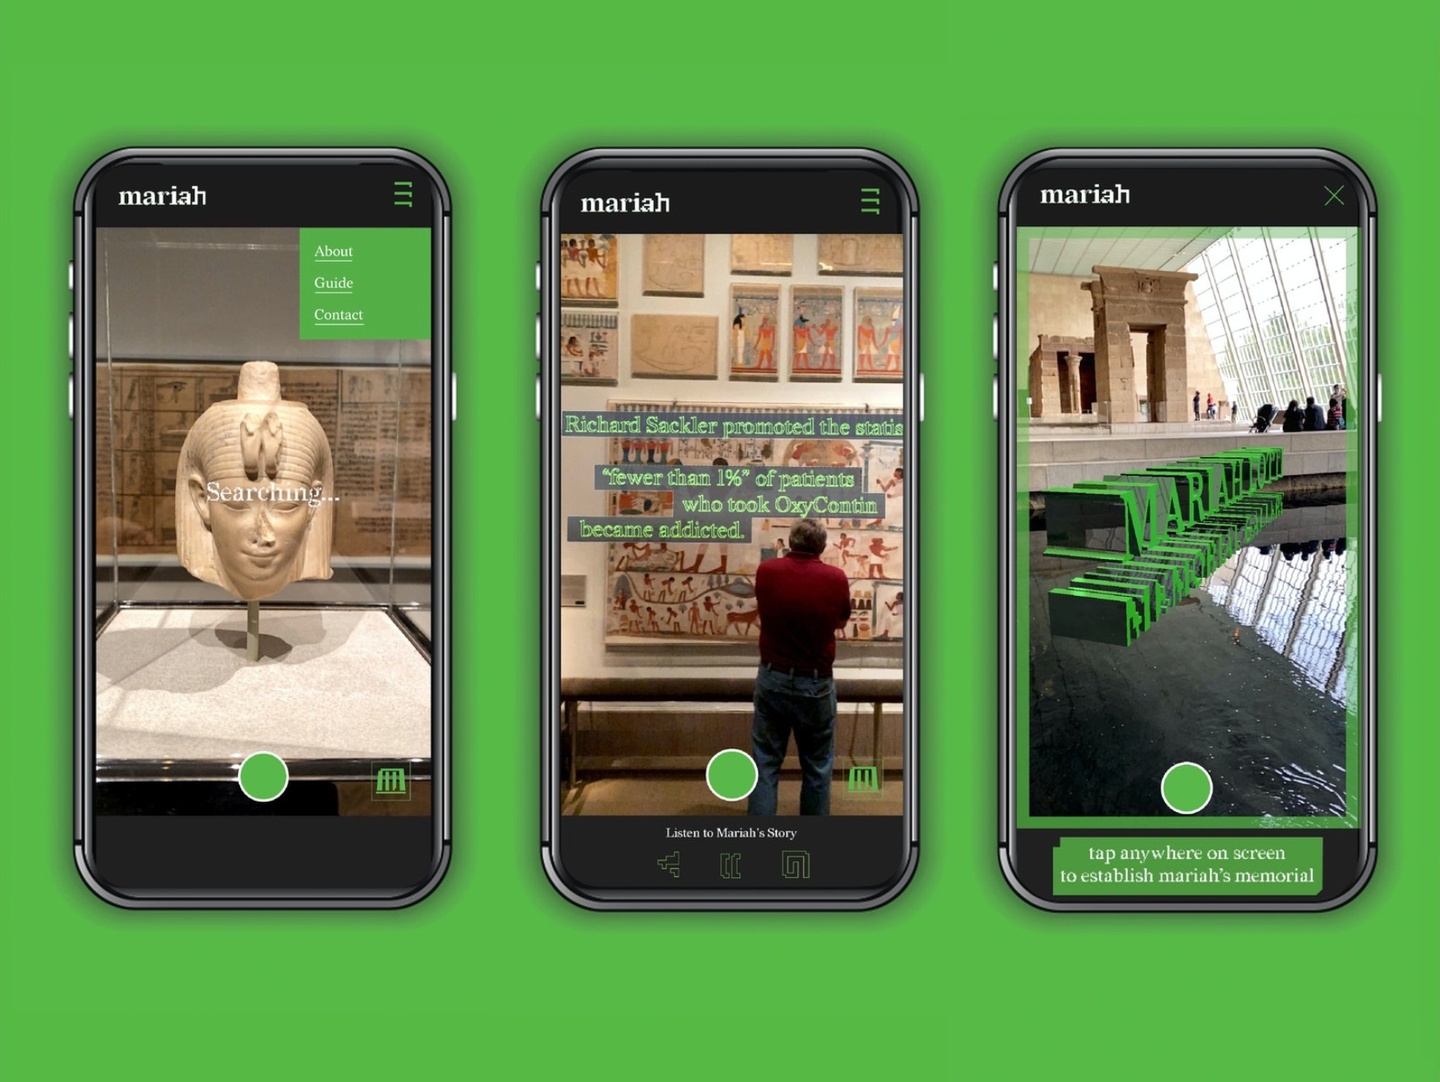 On a bright green background, three mobile phone screens demonstrate an augmented reality app. The screens show ancient artifacts overlayed with text that addresses the object's complicated origin and acquisition story.